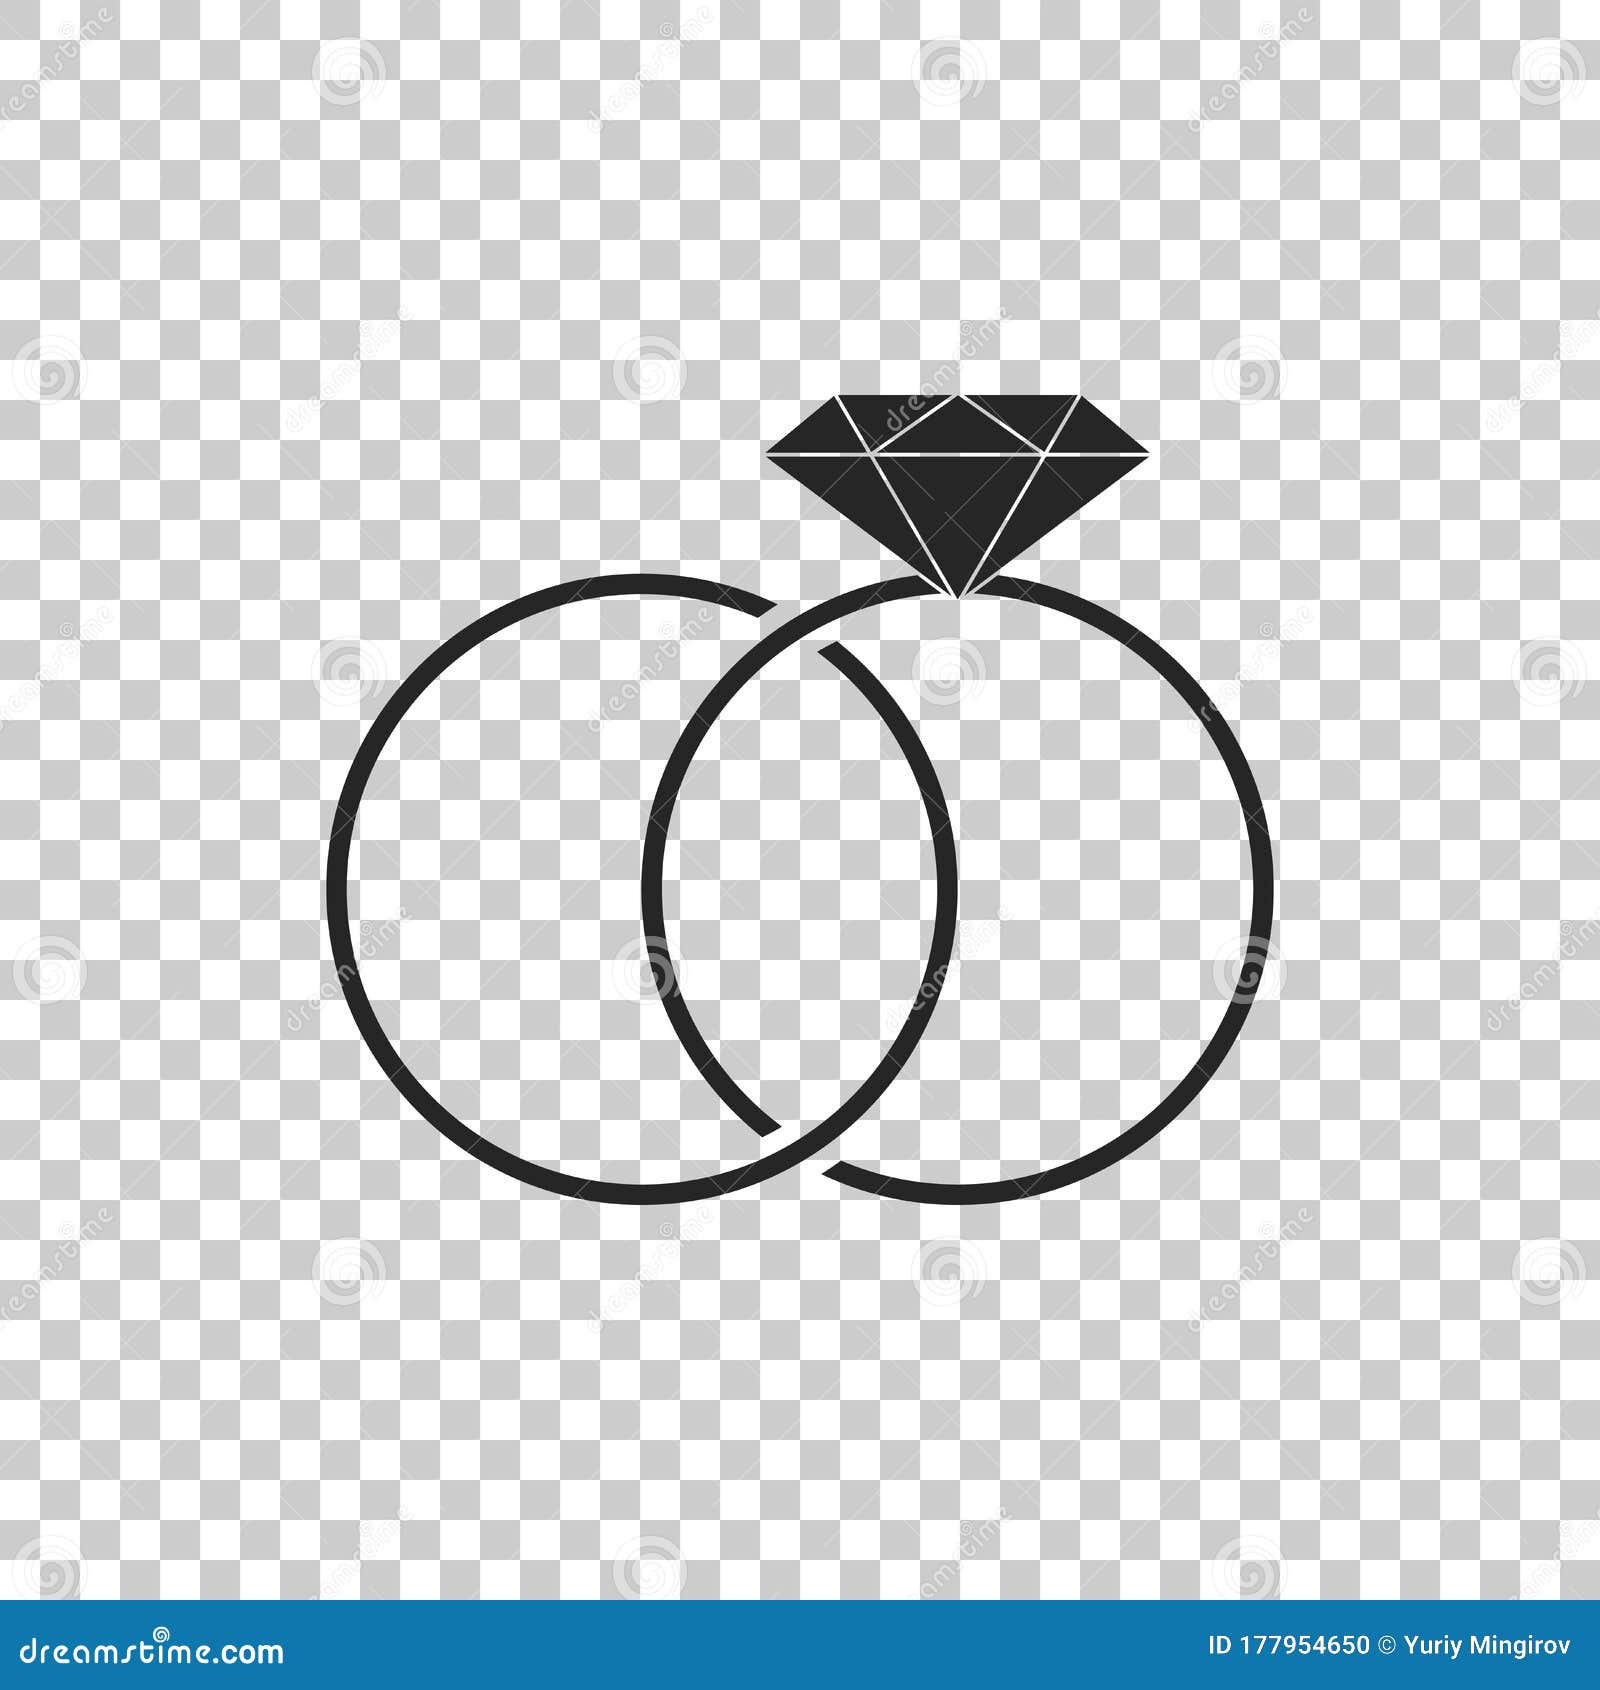 Wedding Rings Icon Isolated on Transparent Background. Bride and Groom ...